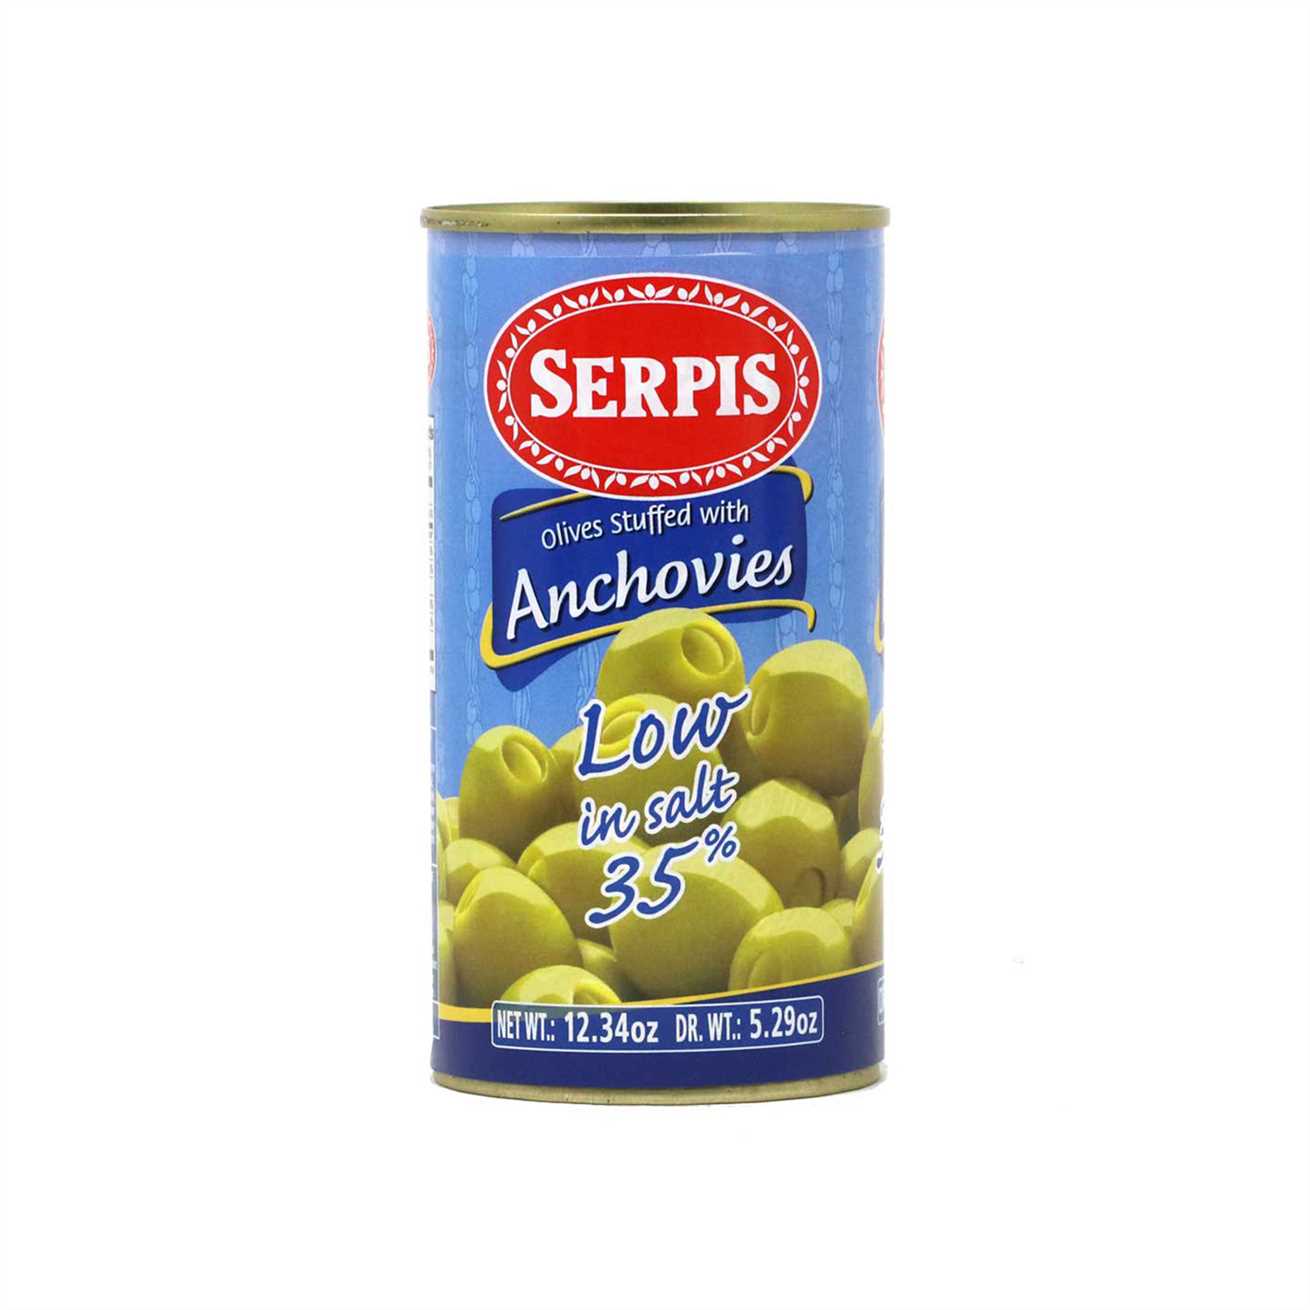 SERPIS OLIVES STUFFED WITH ANCHOVY LOW SALT 5.29oz